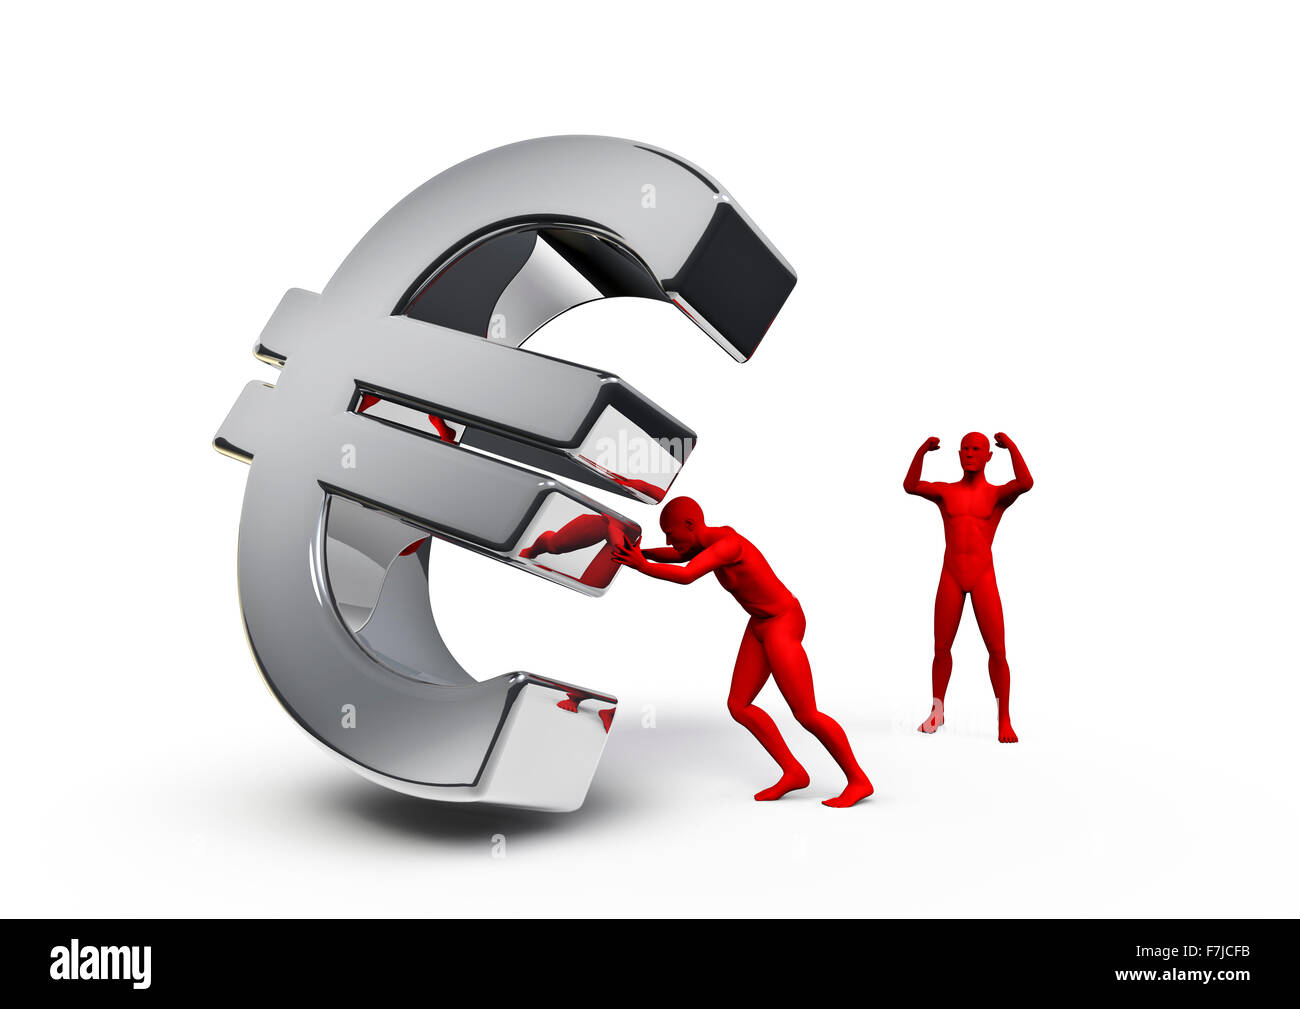 Pushing euro / 3D render of male figure pushing euro symbol with another figure cheering Stock Photo